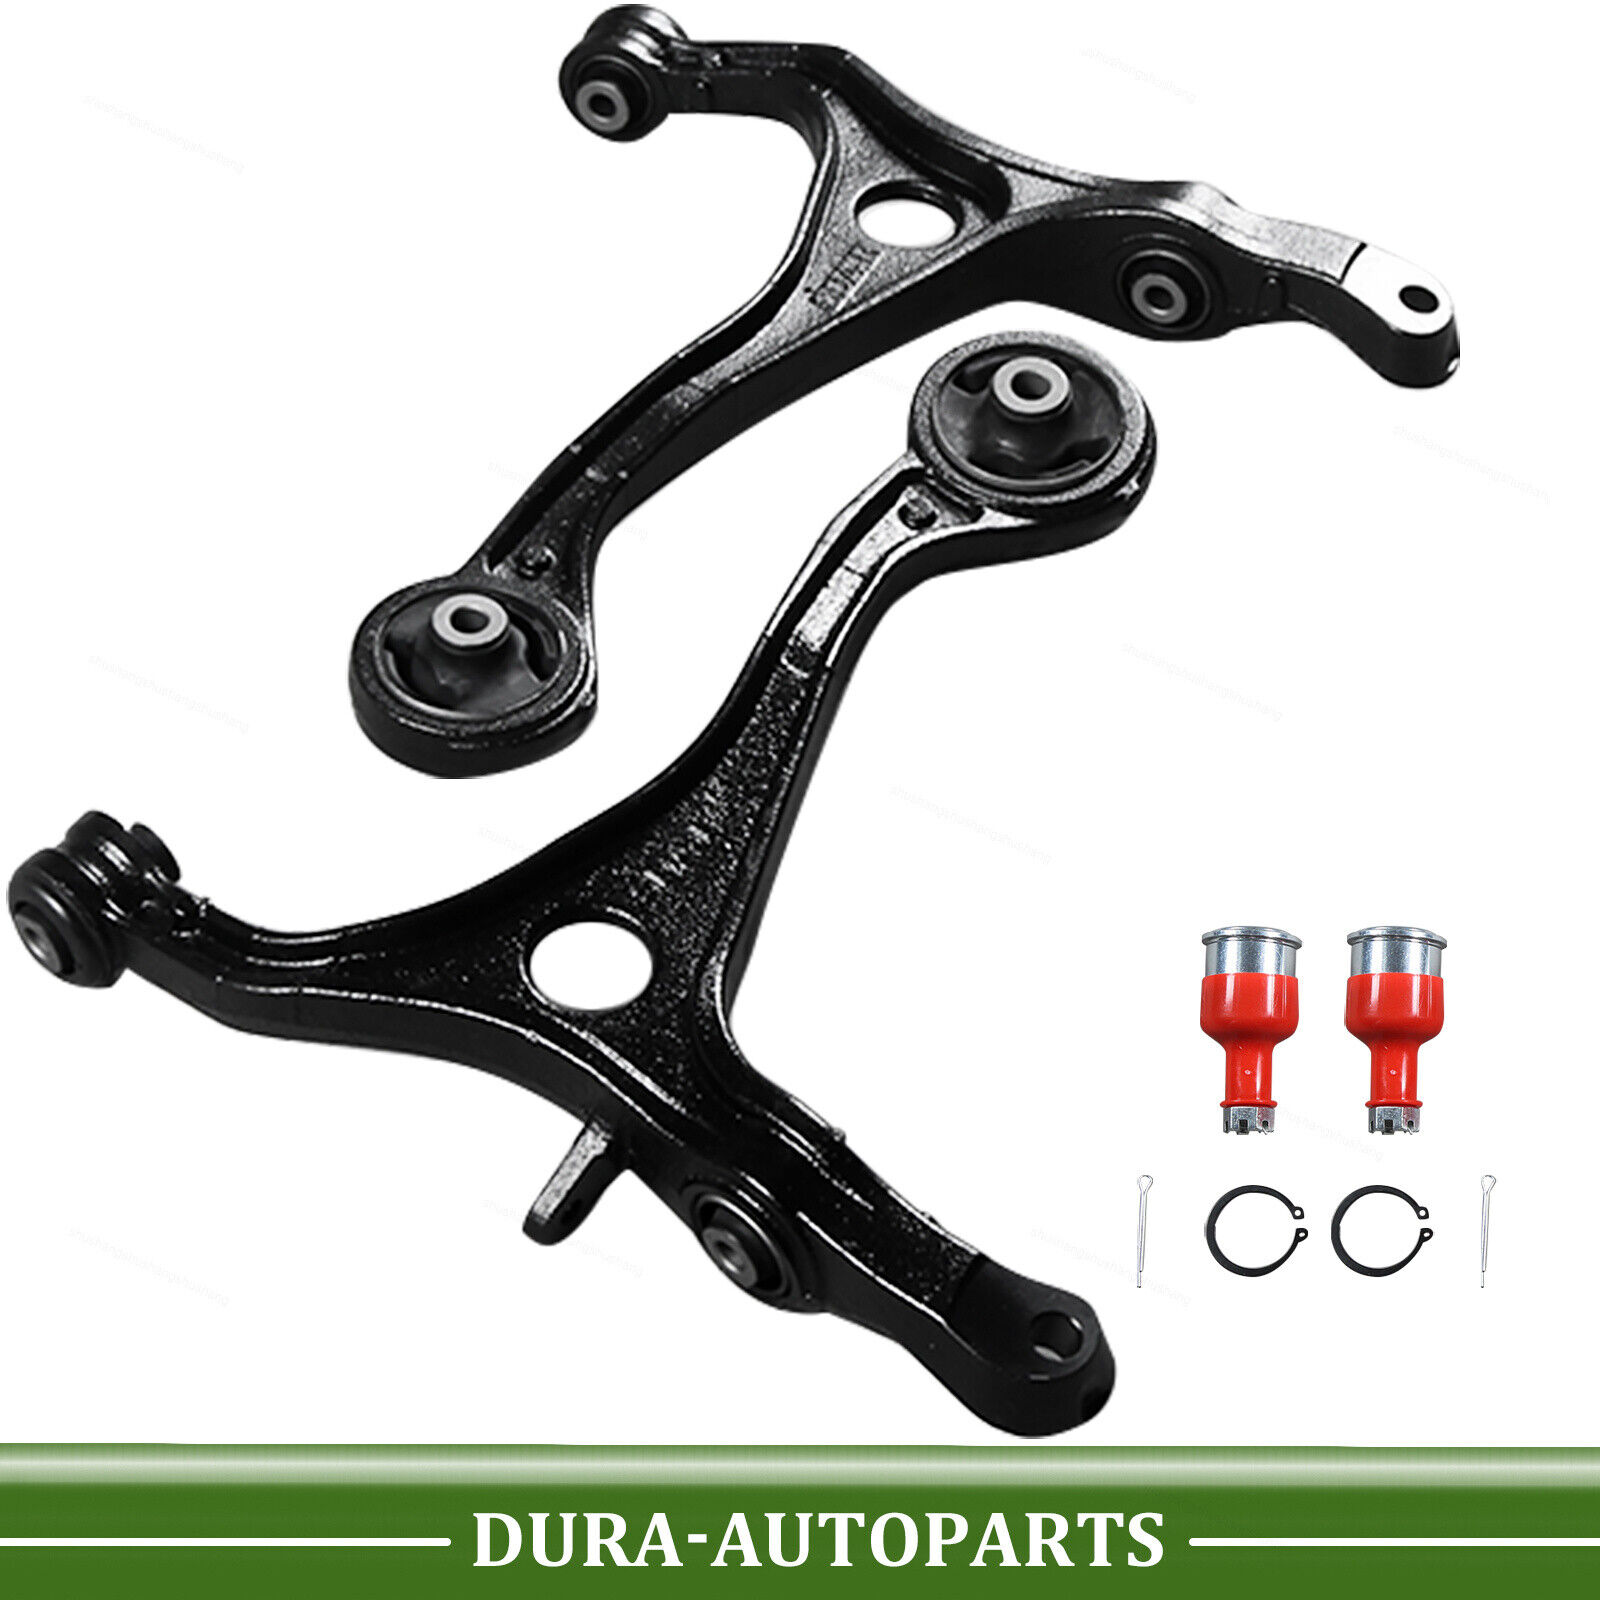 Fit For 2003 2004 2005 2006 2007 Honda Accord Front Lower Control Arms